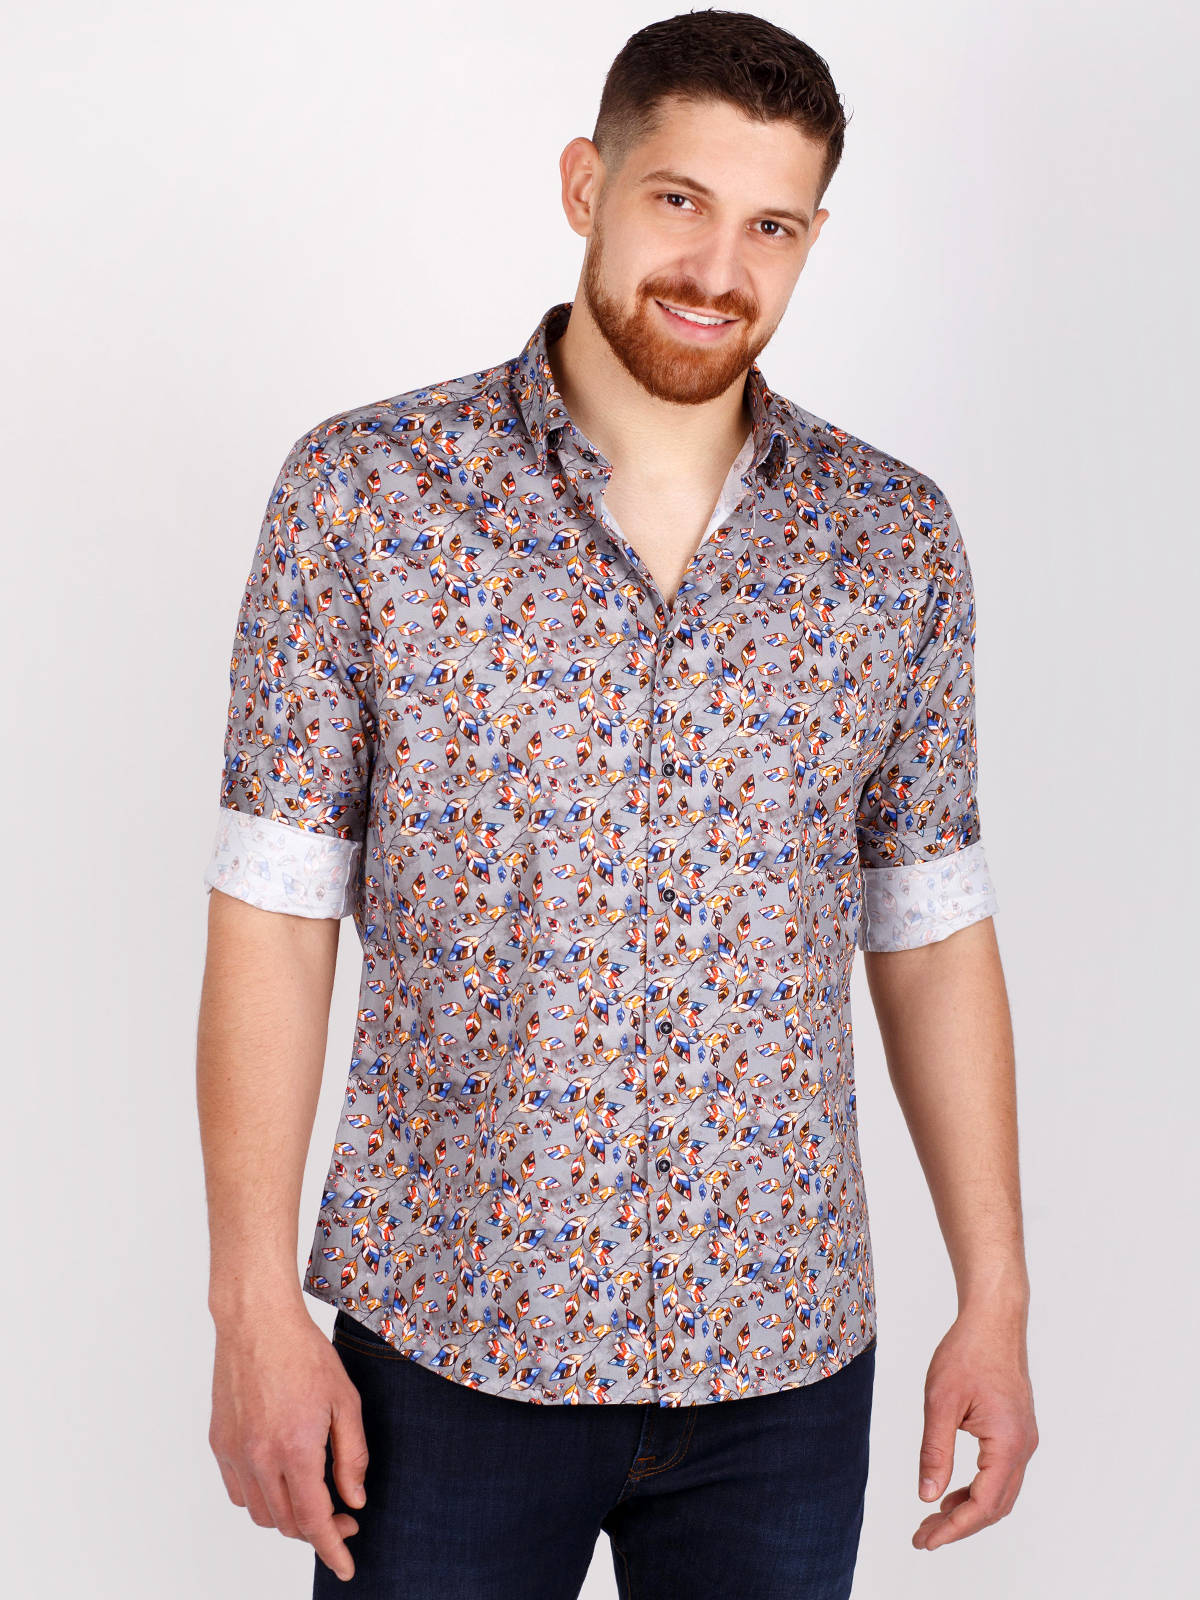 Shirt in gray with a print of colored le - 21499 € 38.81 img2